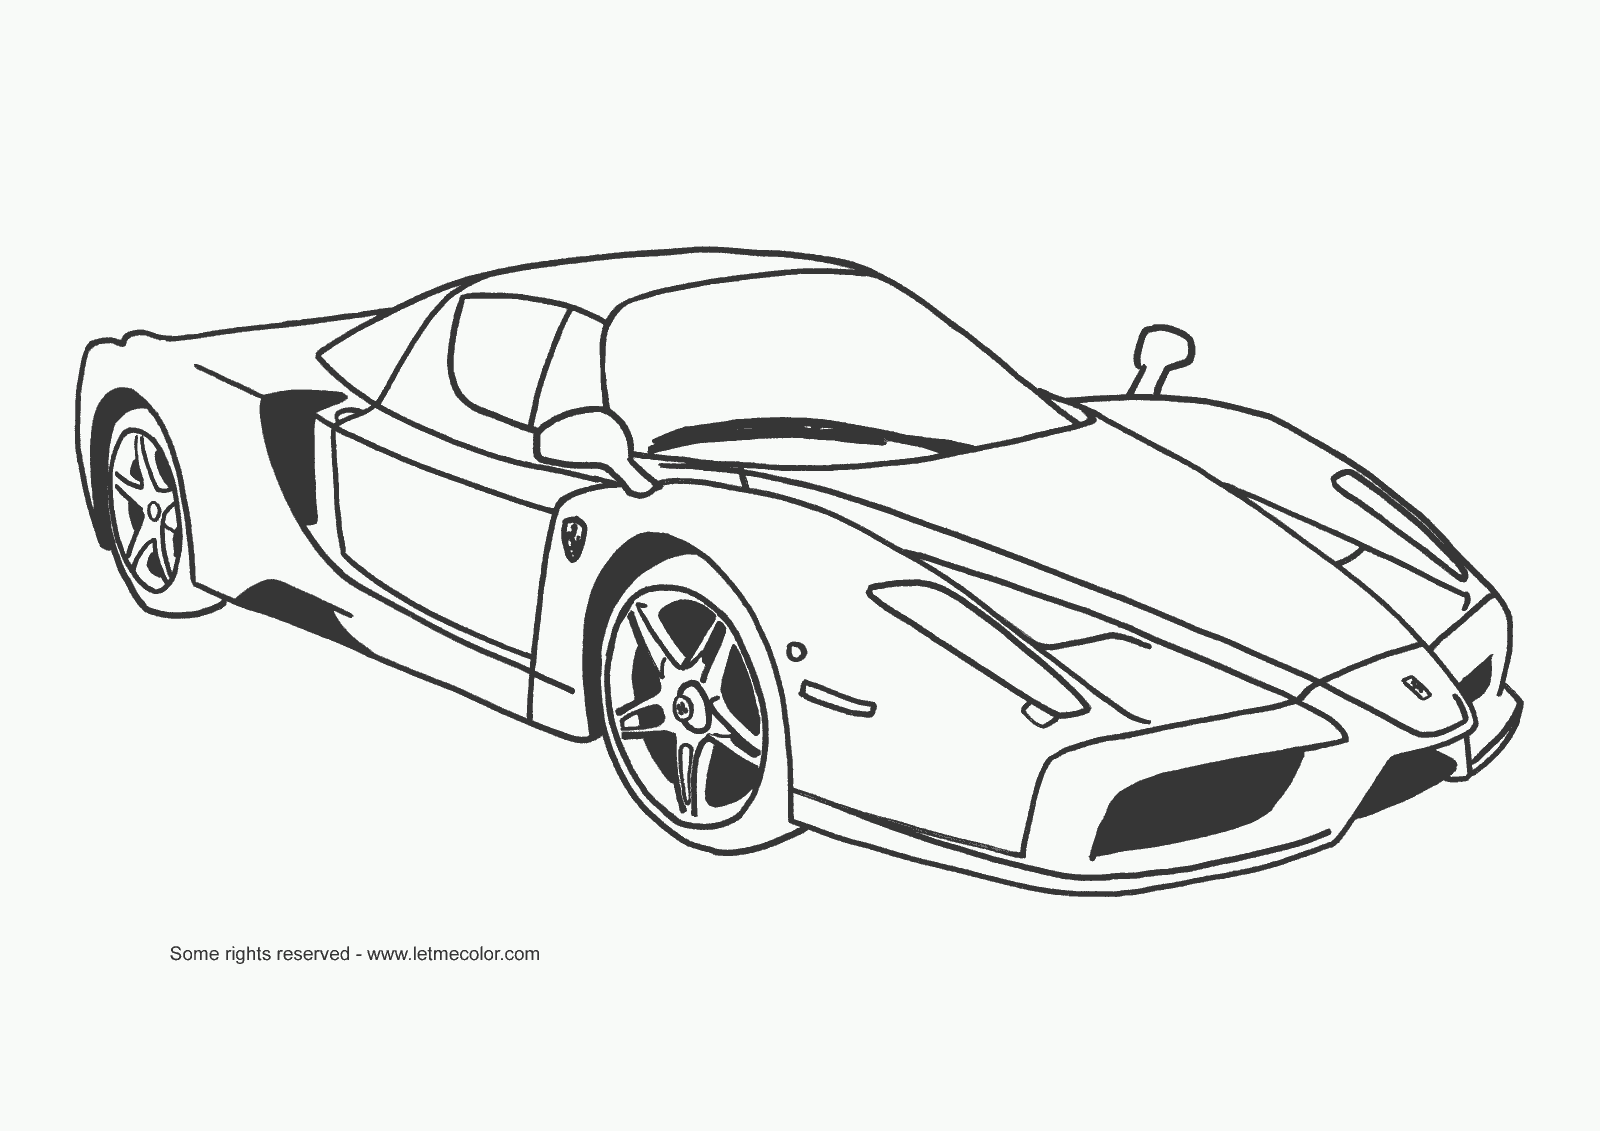 cars colouring page disney pixar39s cars coloring pages disneyclipscom colouring page cars 